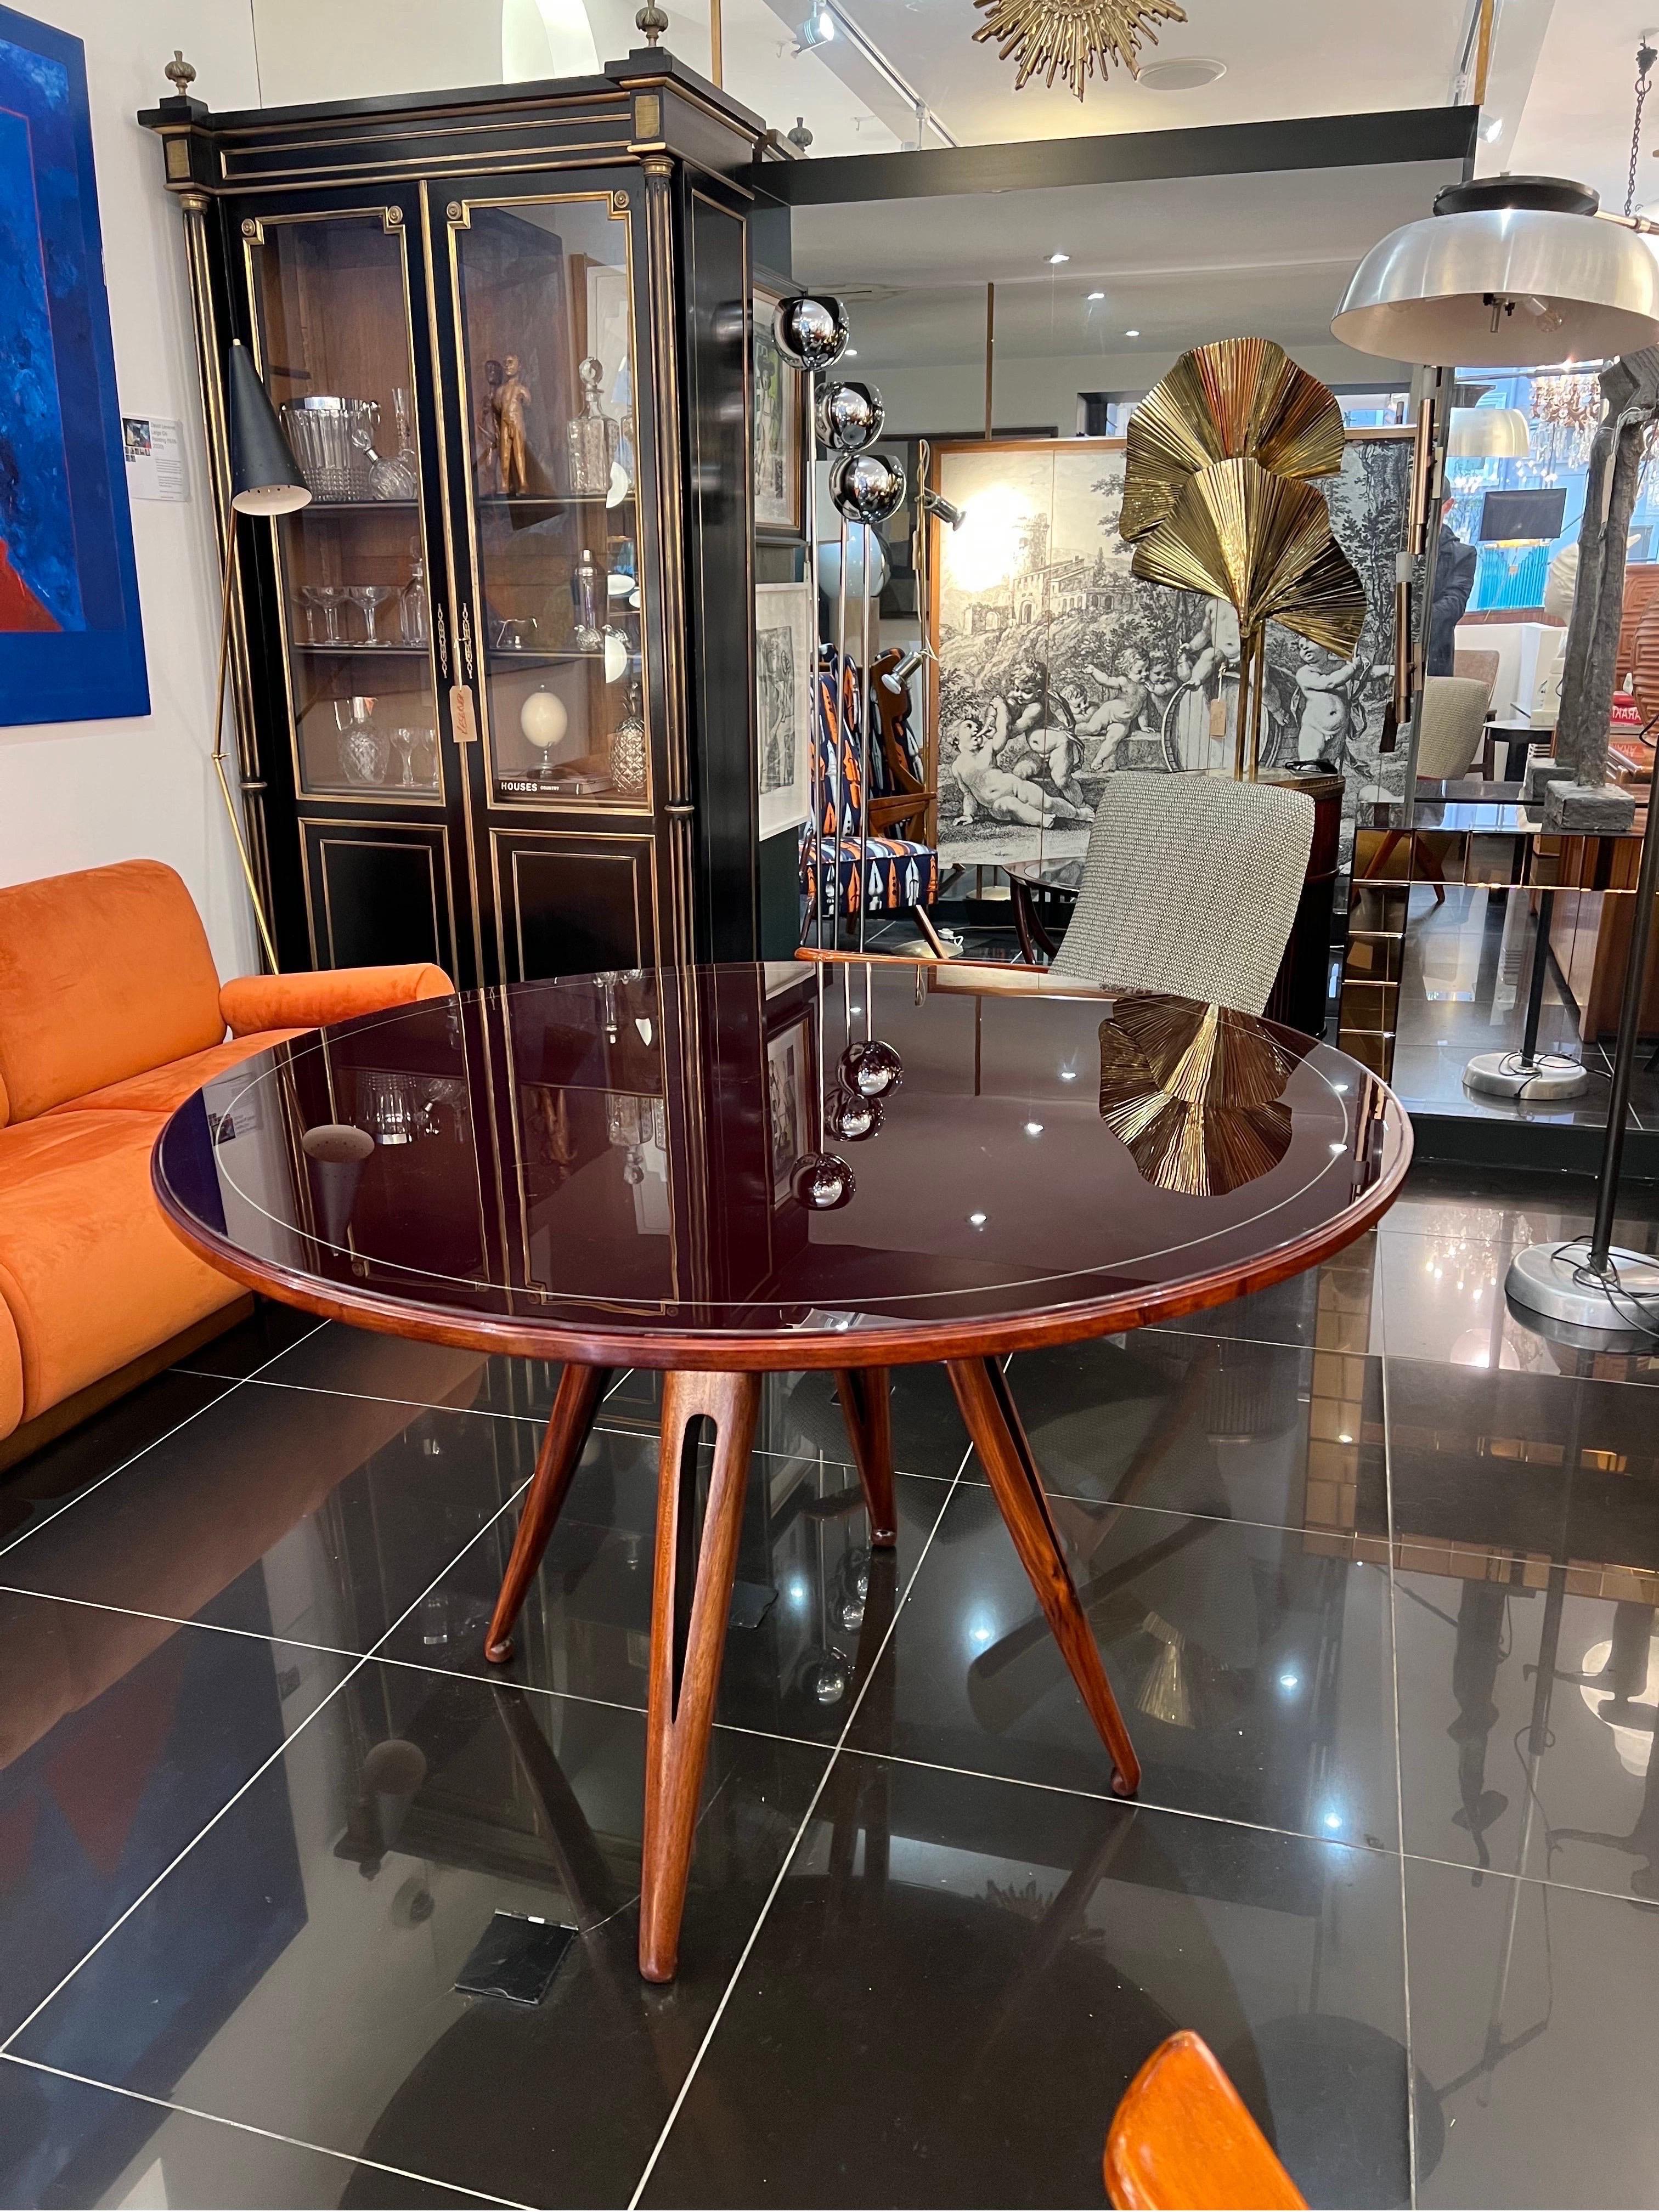 An elegant centre or dining table in solid walnut wood designed by Silvio Cavatorta in the 1950s. The table top bares its original mulberry glass top that slots directly into a framed base and the beautifully designed legs support the table from the